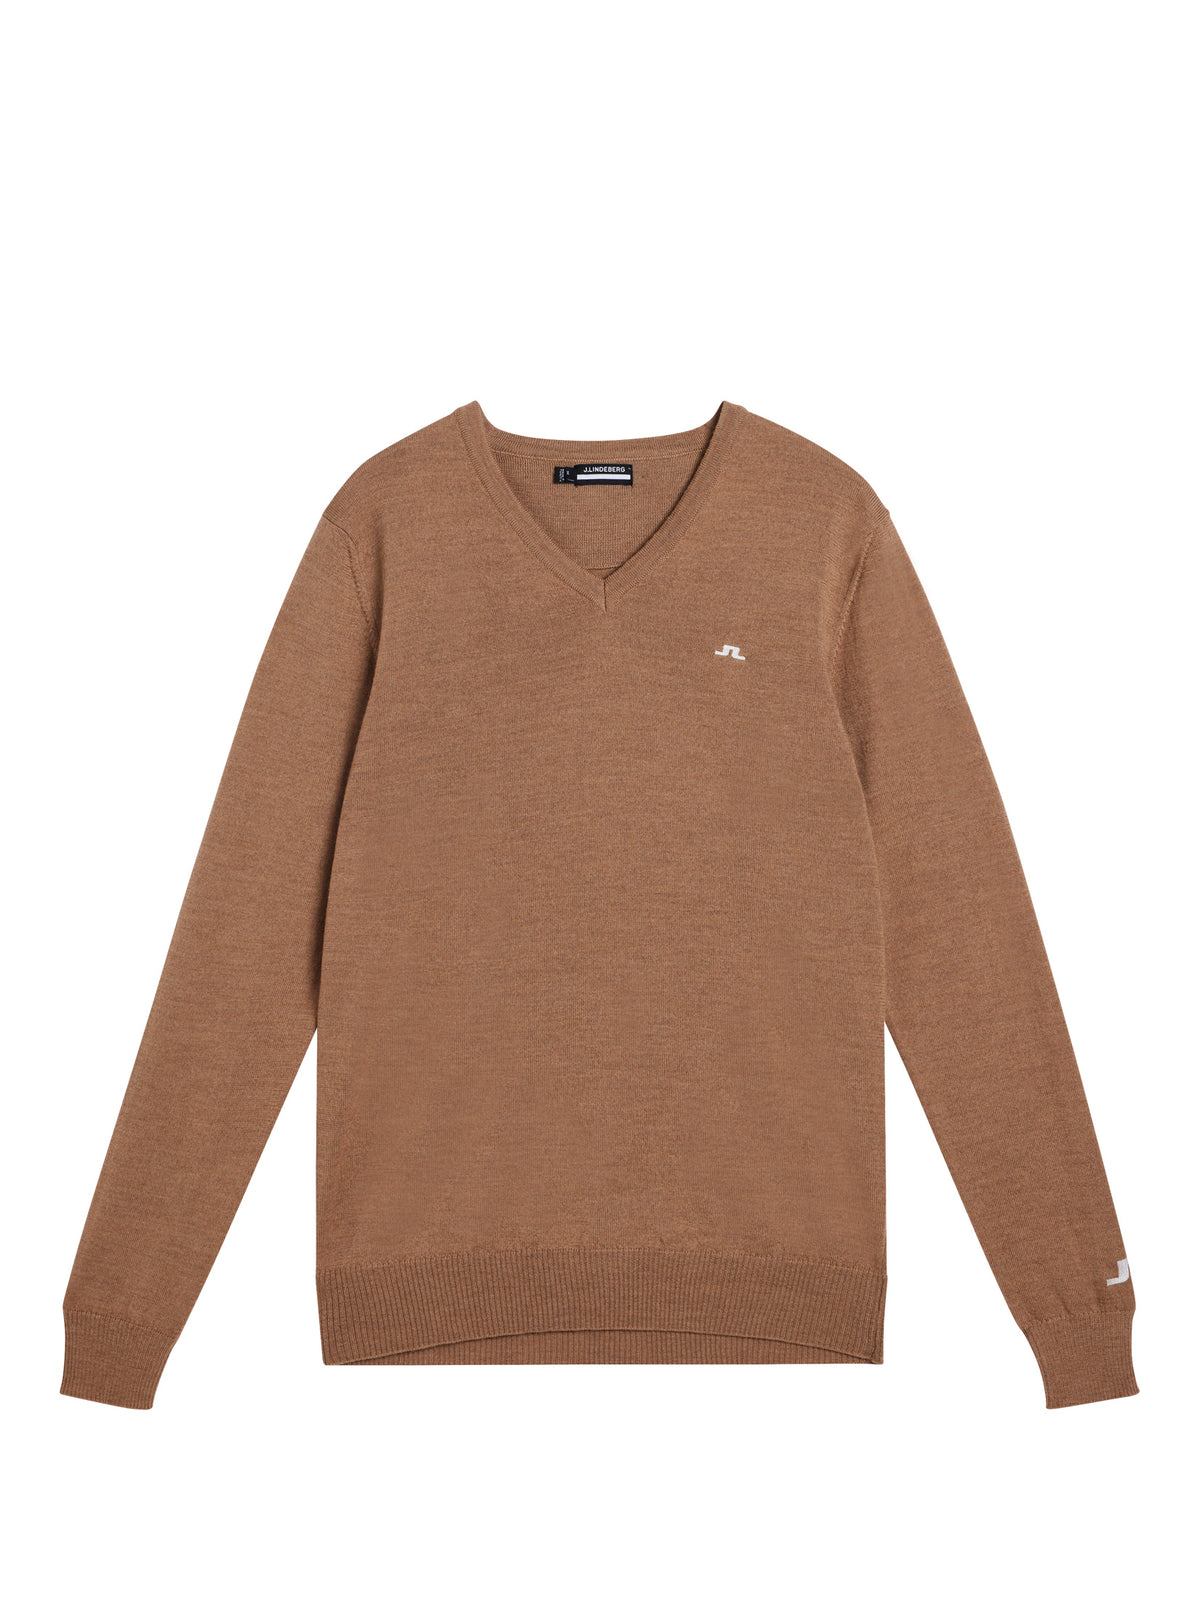 Lymann Knitted Sweater / Tiger Brown